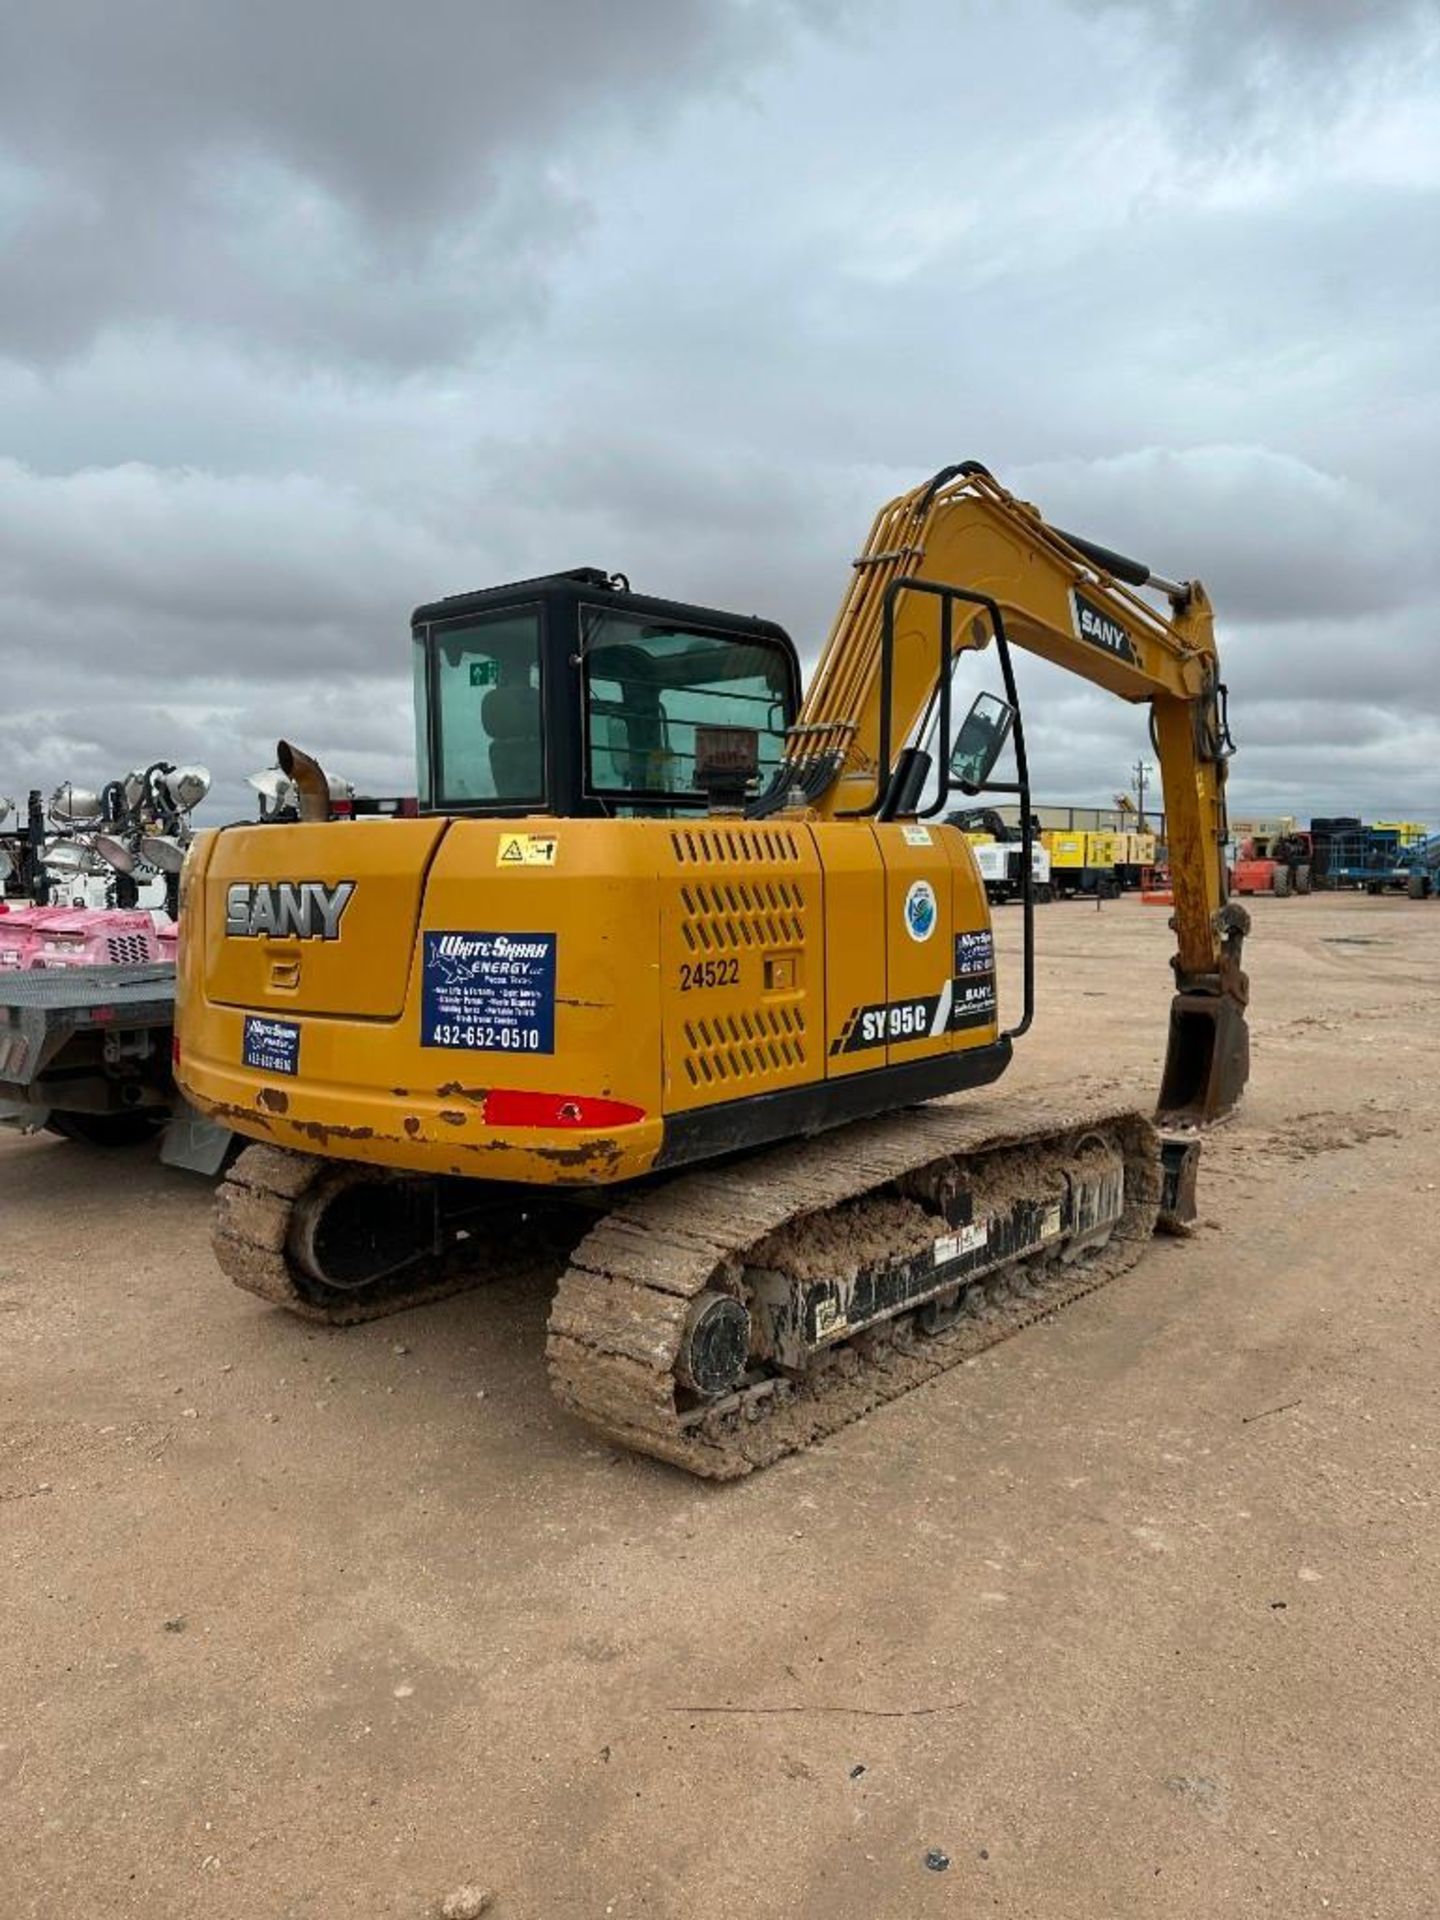 2019 Sany SY 95C Tracked Excavator, 2,309 Hours, 12" Tooth Bucket, Enclosed Cab, Diesel Engine, 8' H - Image 3 of 7